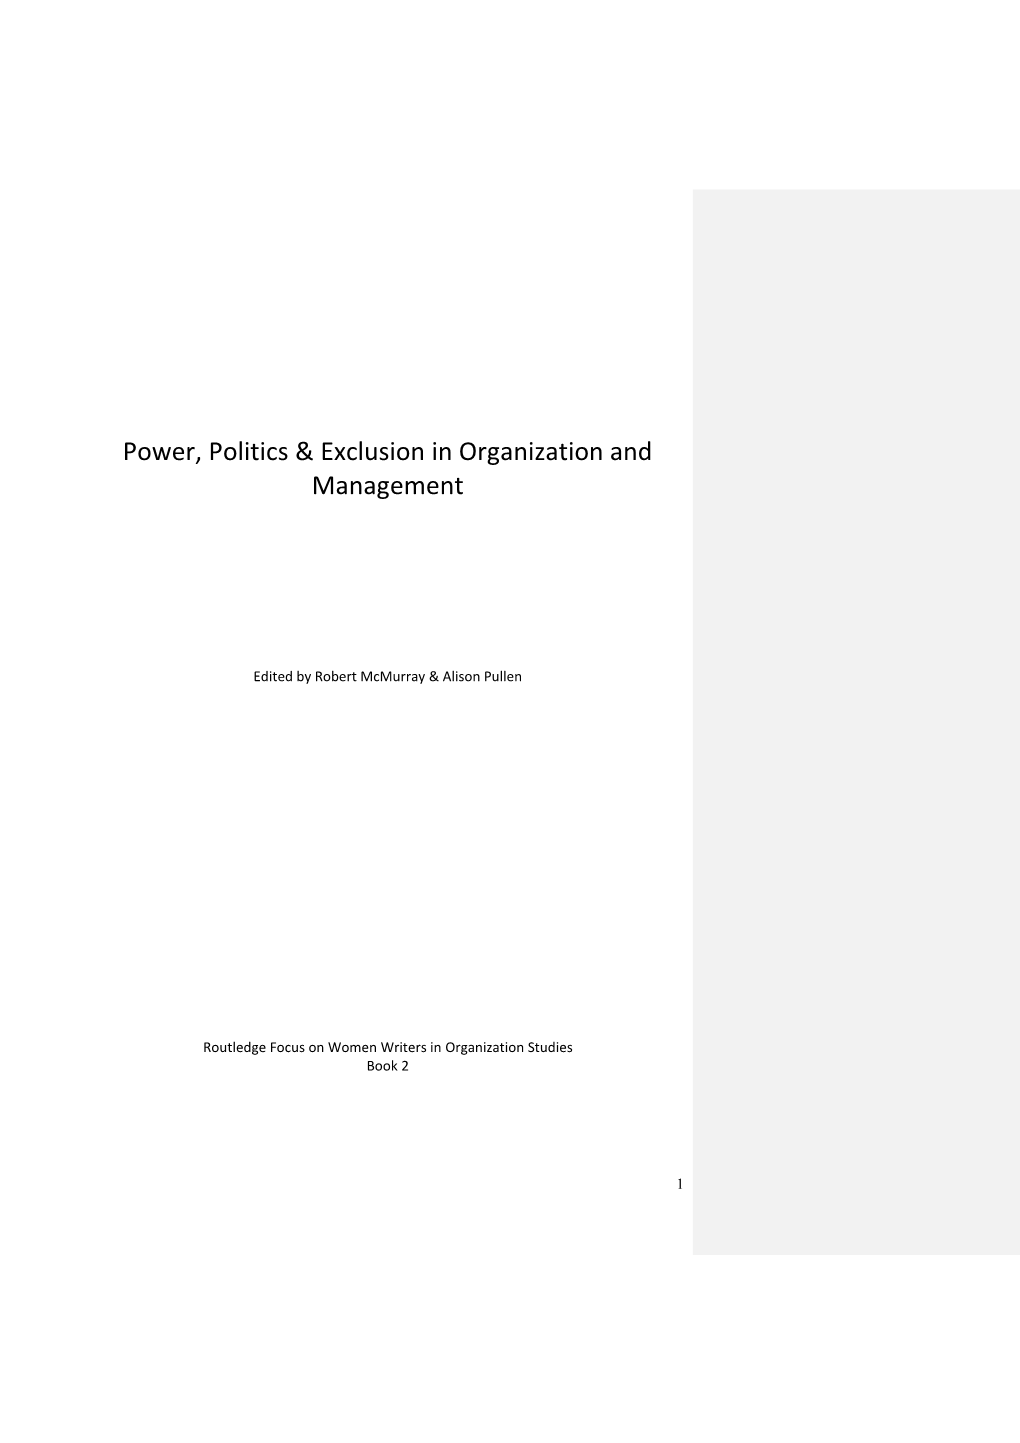 Power, Politics & Exclusion in Organization and Management